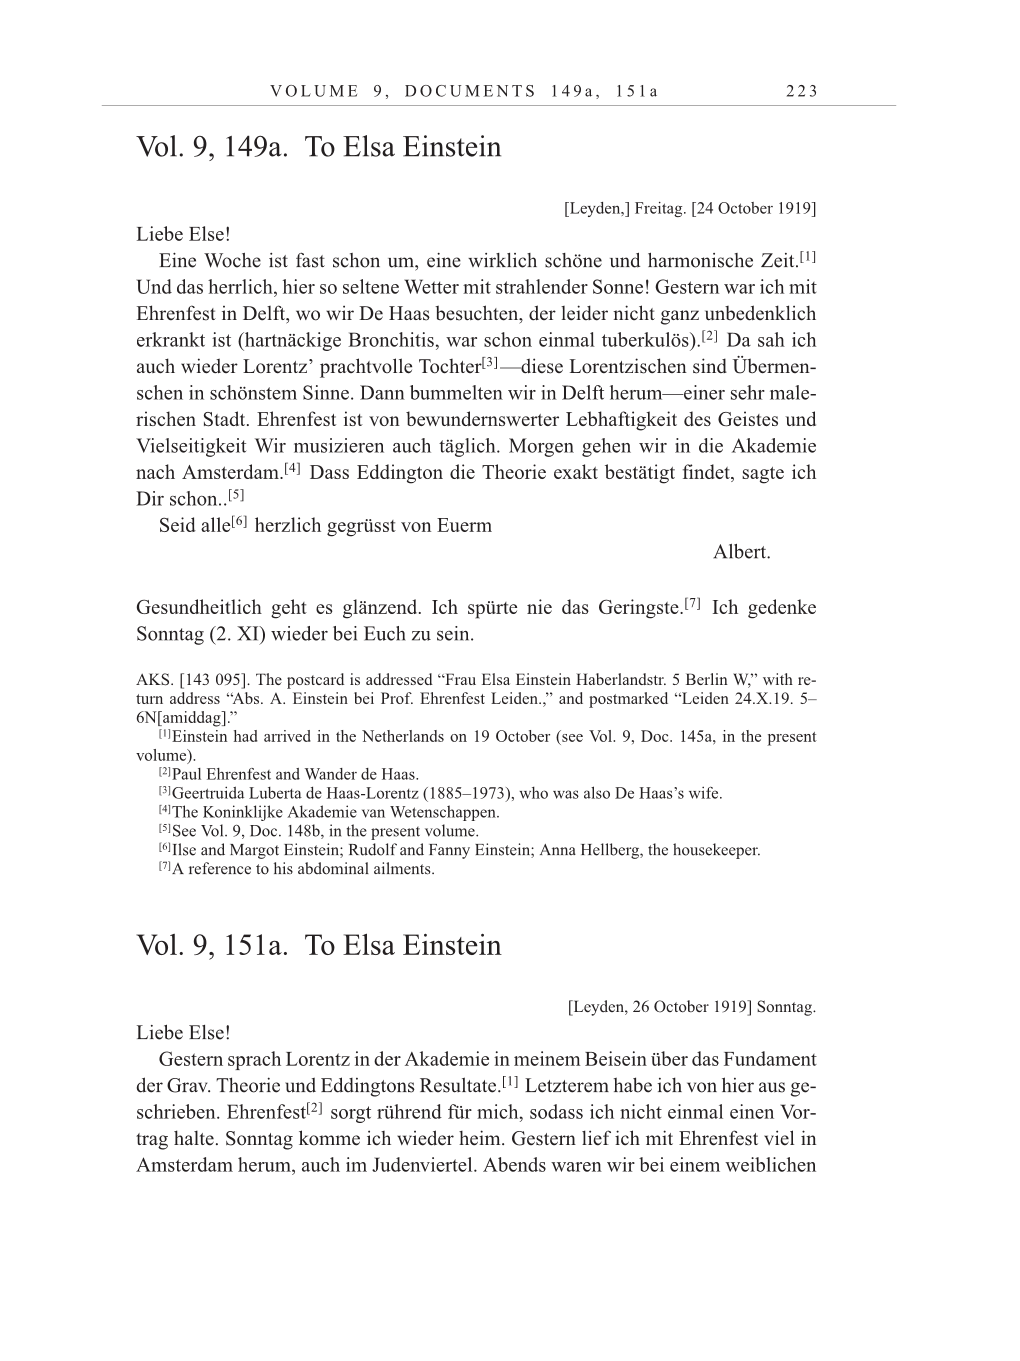 Volume 10: The Berlin Years: Correspondence May-December 1920 / Supplementary Correspondence 1909-1920 page 223